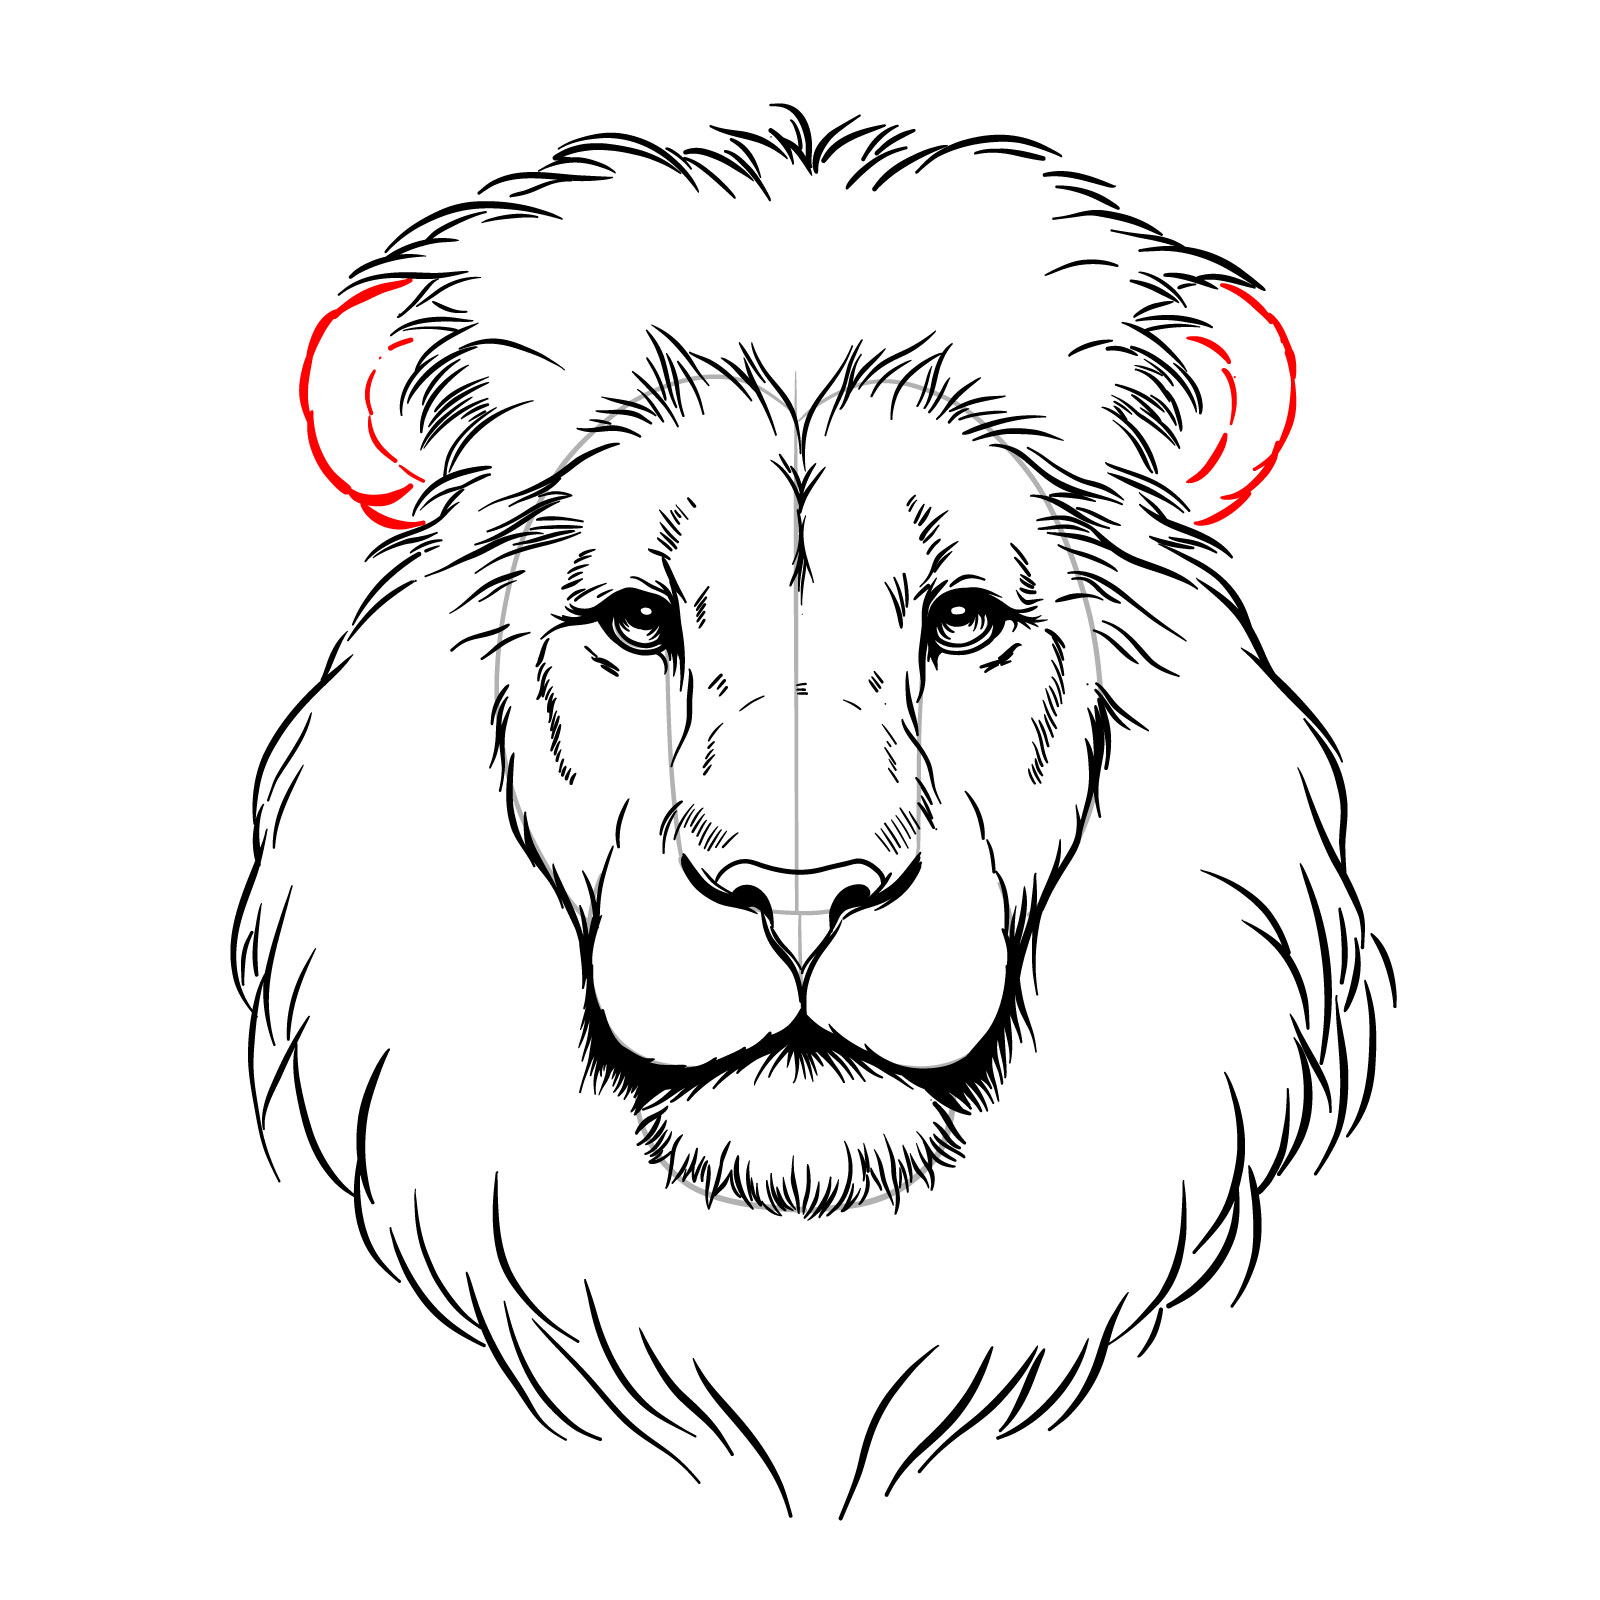 Drawing the ears on a lion's face front view guide - step 11